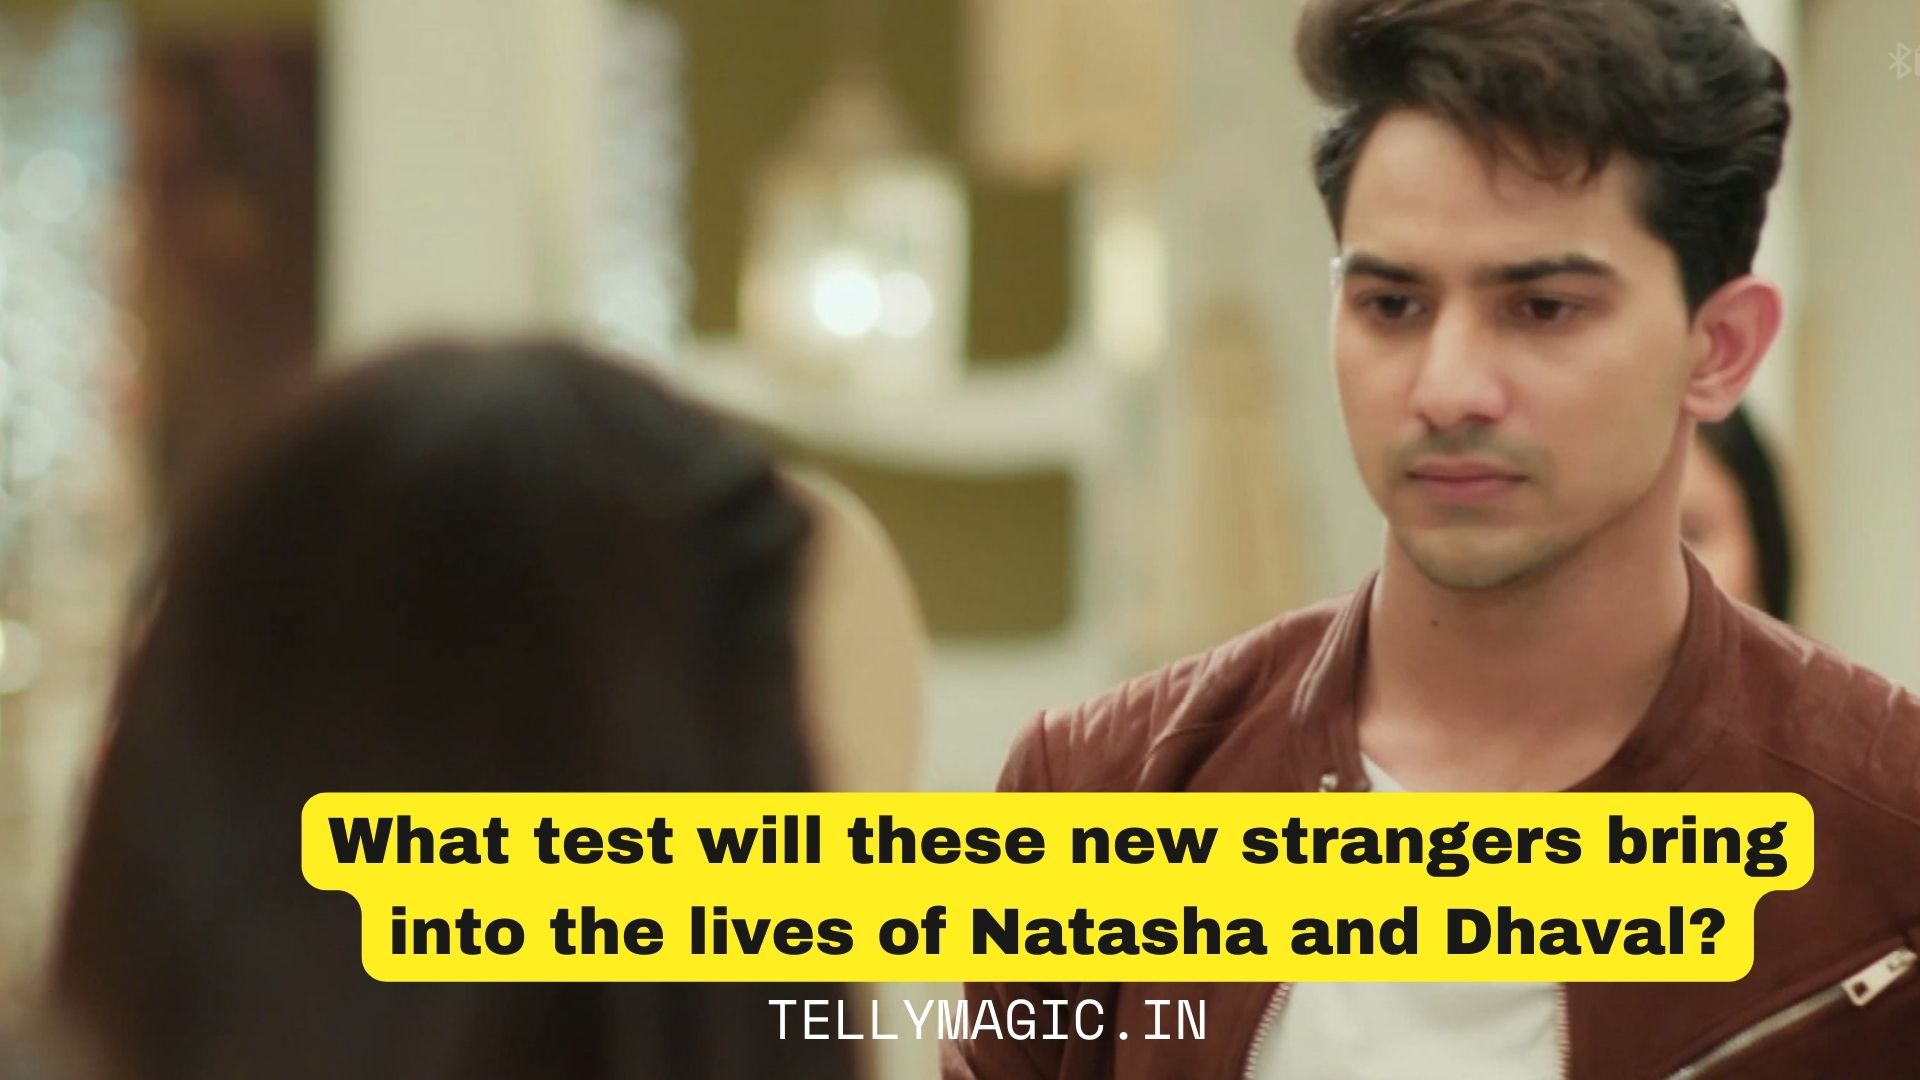 What test will these new strangers bring into the lives of Natasha and Dhawal ?